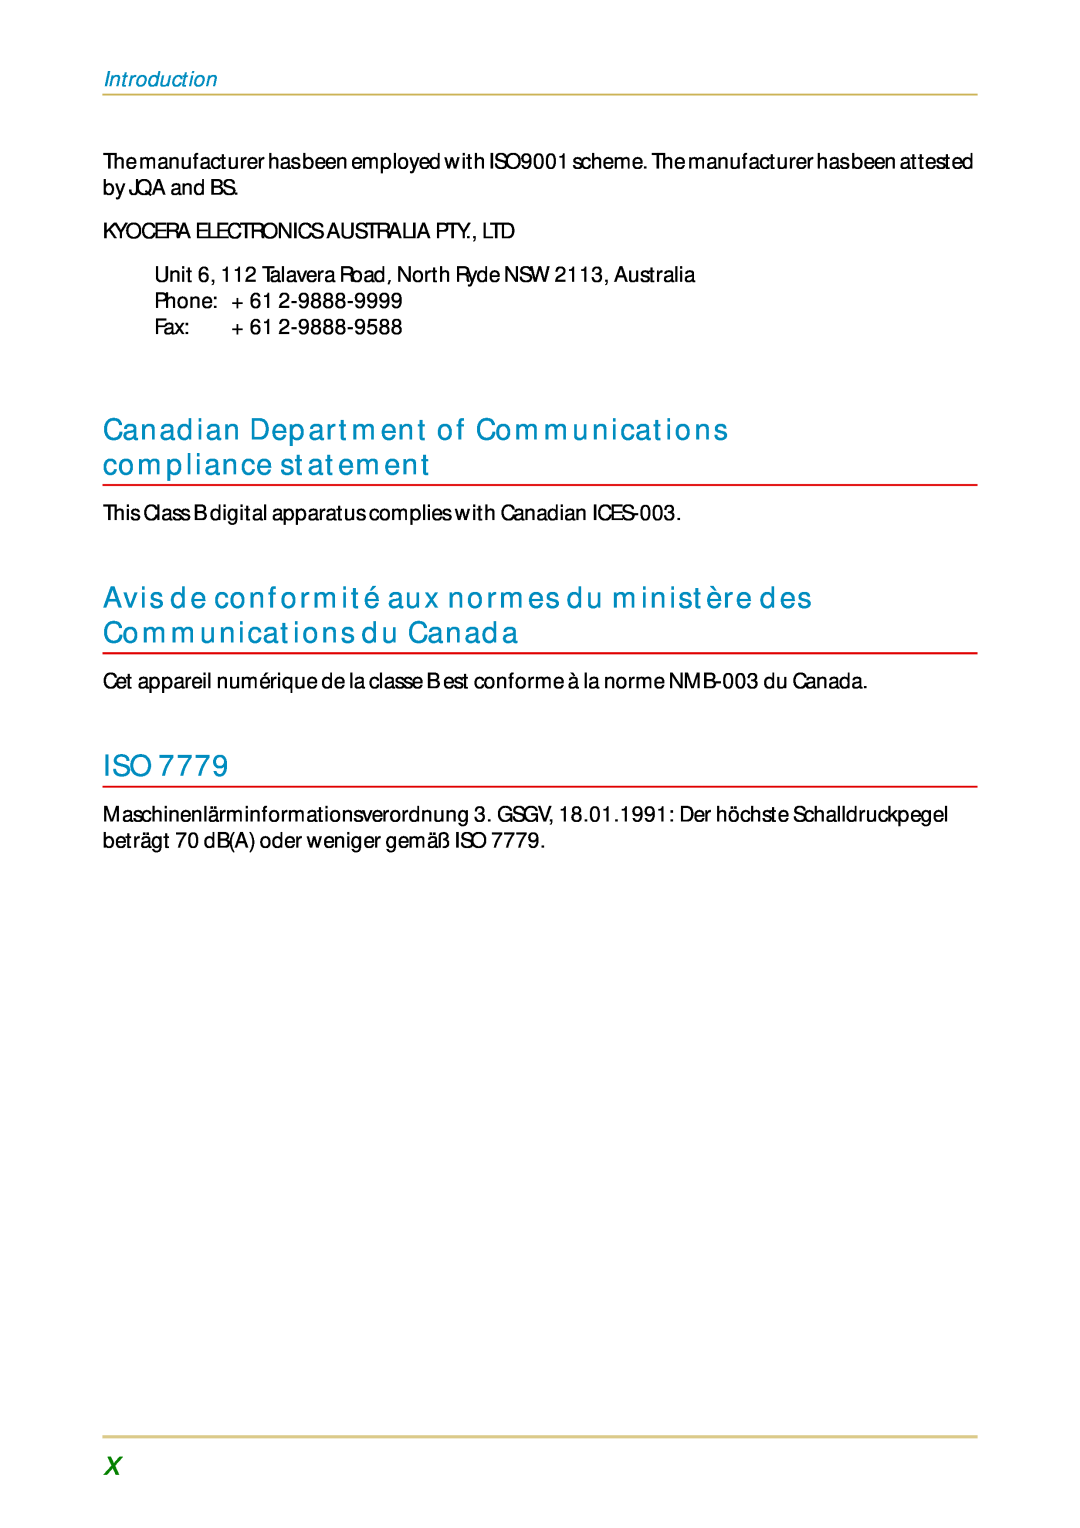 Kyocera FS-1700 user manual Canadian Department of Communications compliance statement 